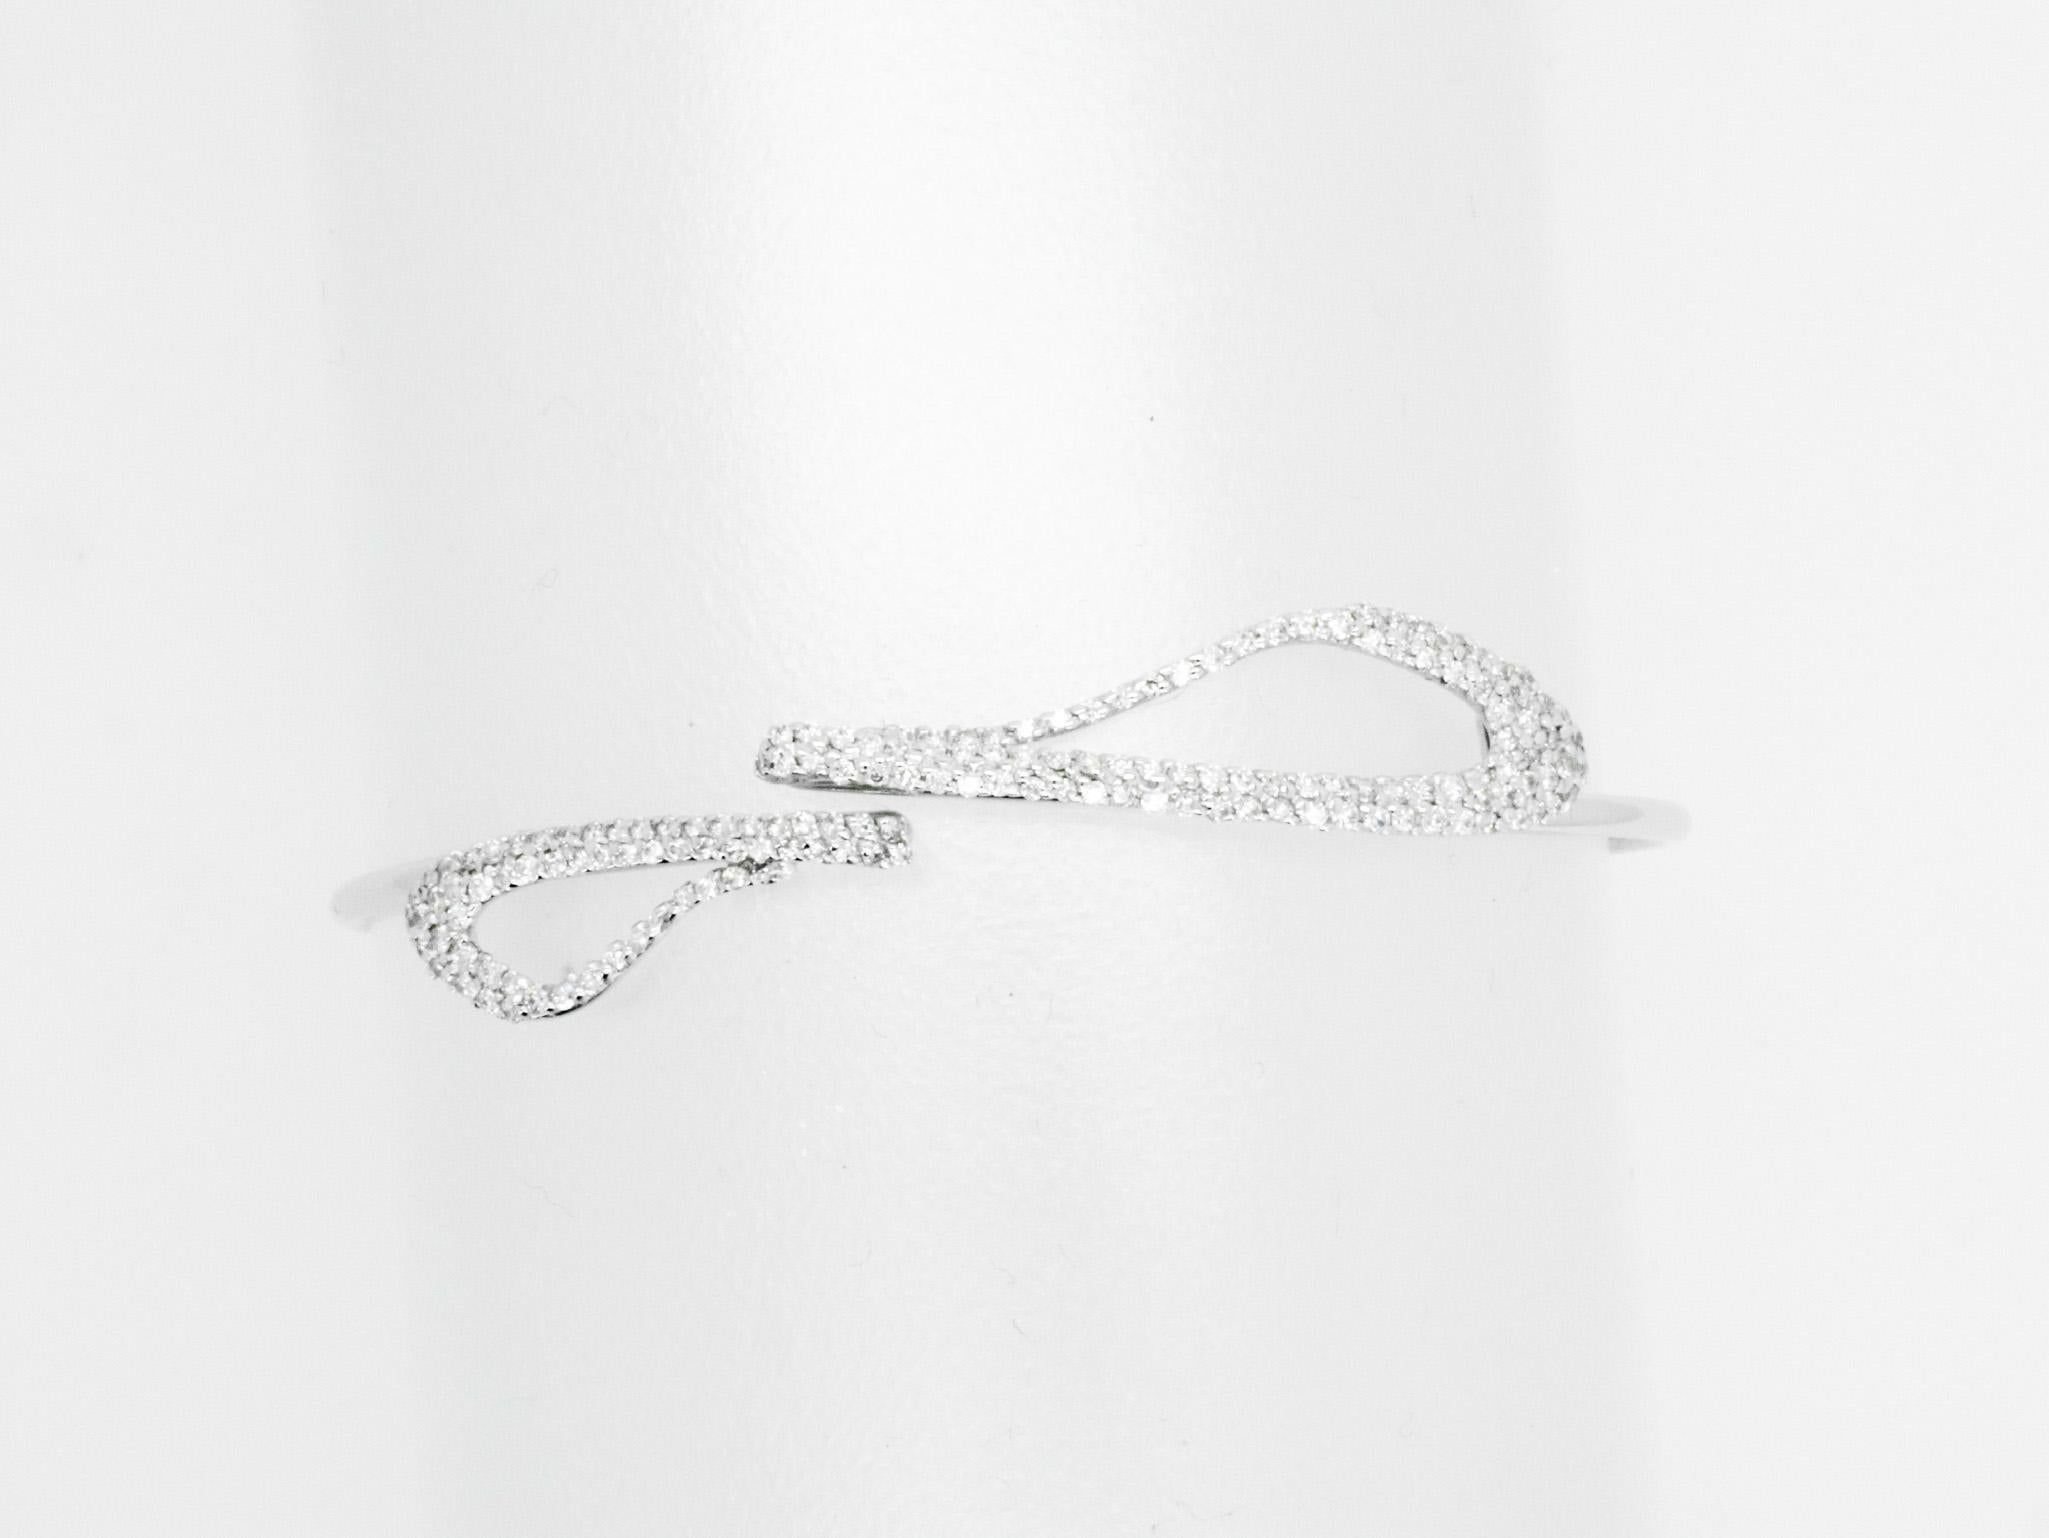 Beatrice Barzaghi Diamond Pave White Gold Ethereal Delicate Cuff Bracelet For Sale 4